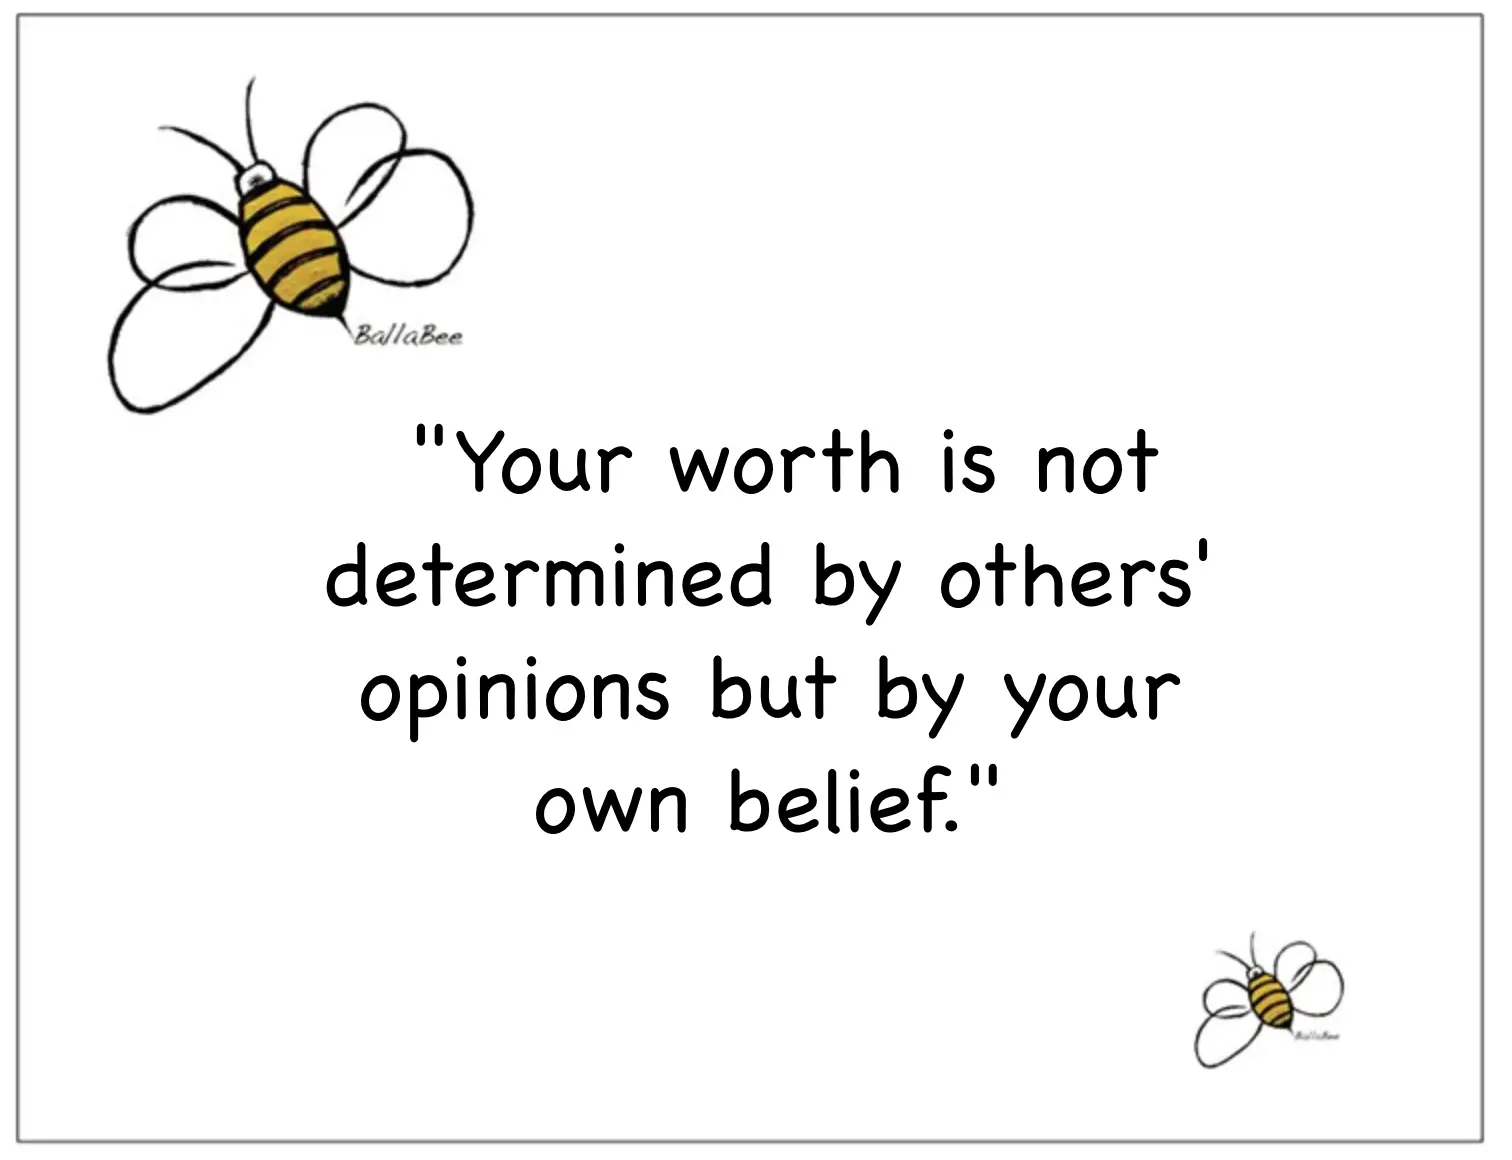 Your worth is not determined by others' opinions but by your own belief